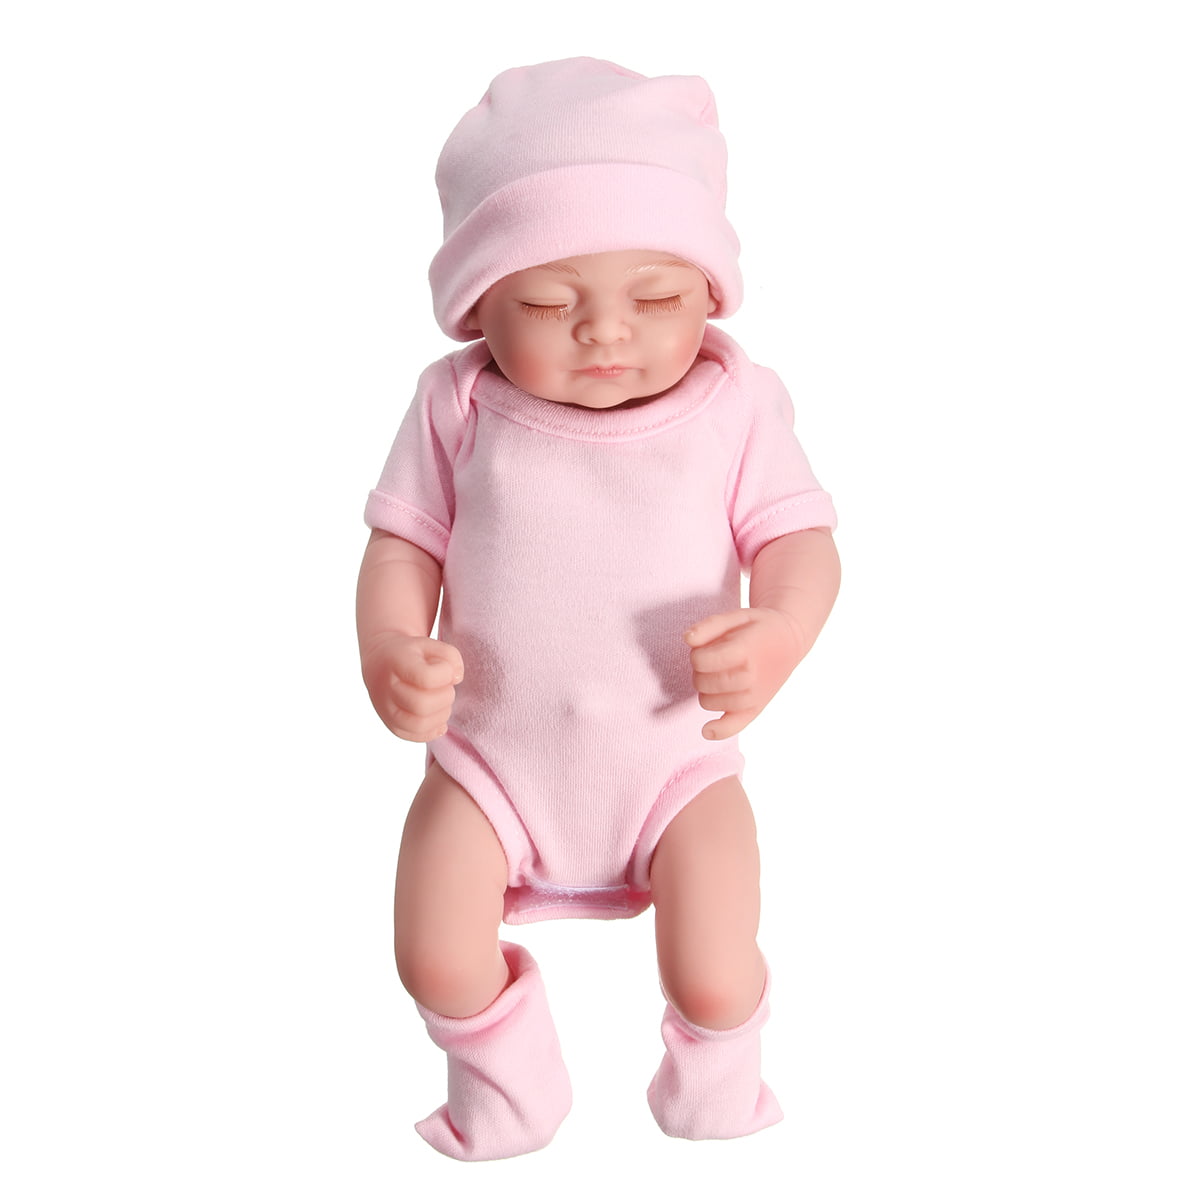 baby alive doll that blinks